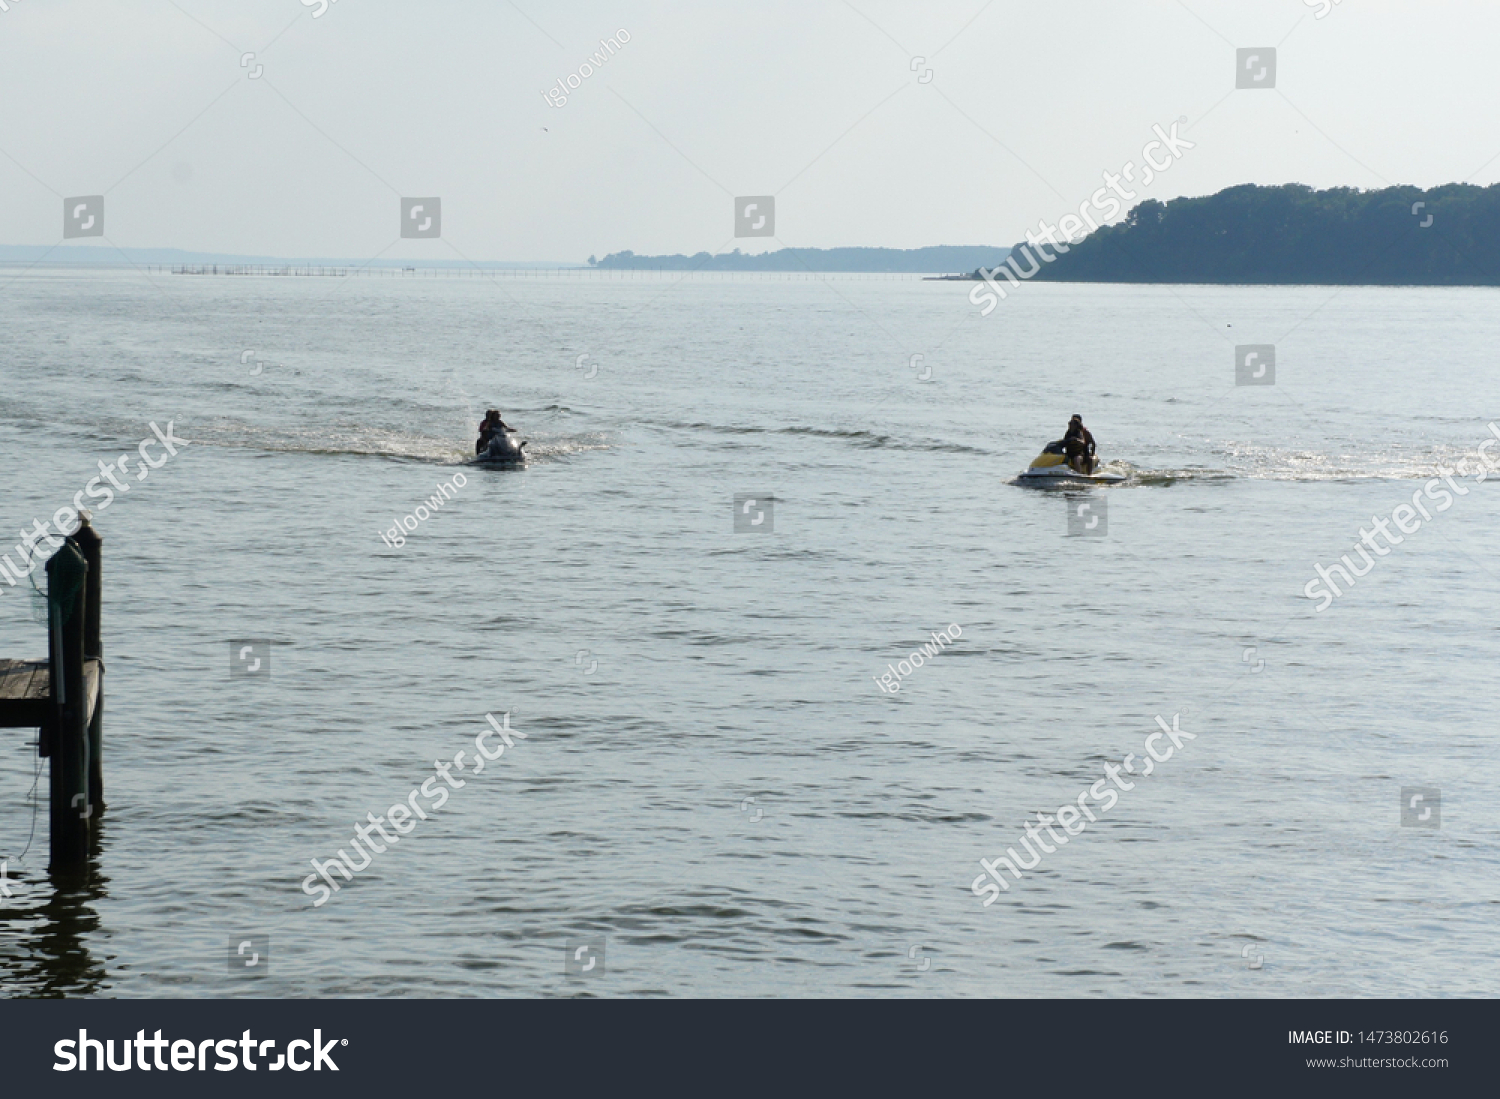 Recreational watercraft on the bay #1473802616